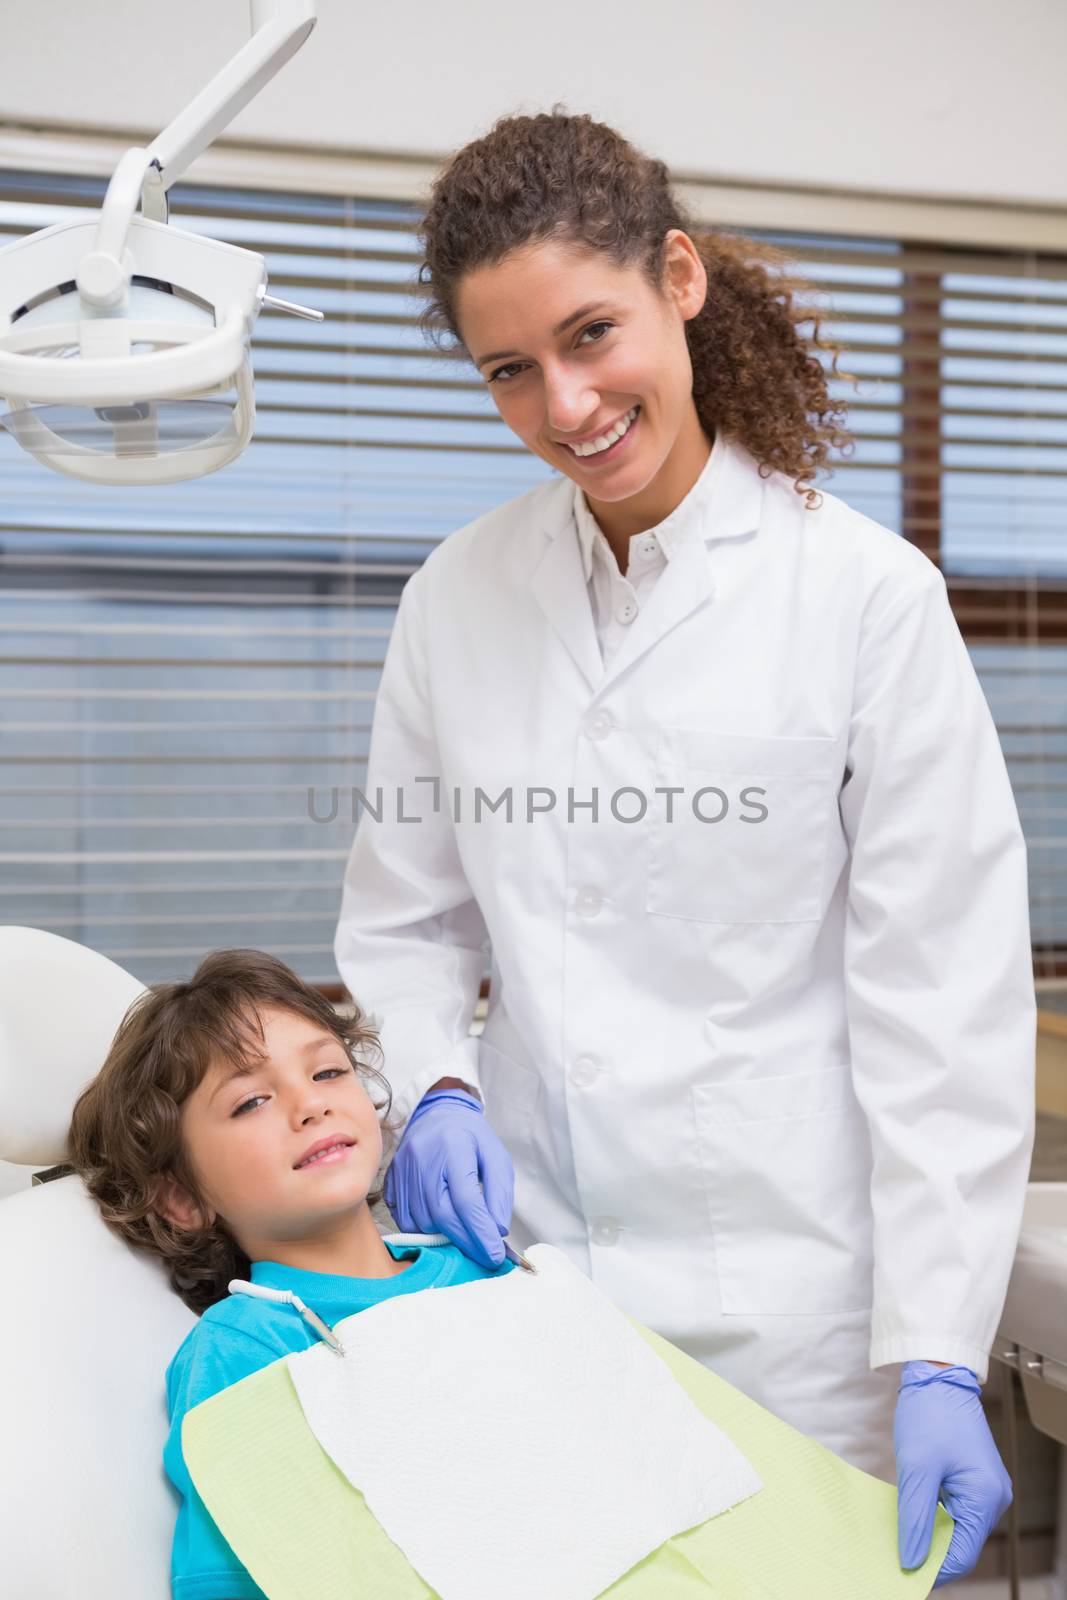 Pediatric dentist smiling with little boy in the chair at the dental clinic